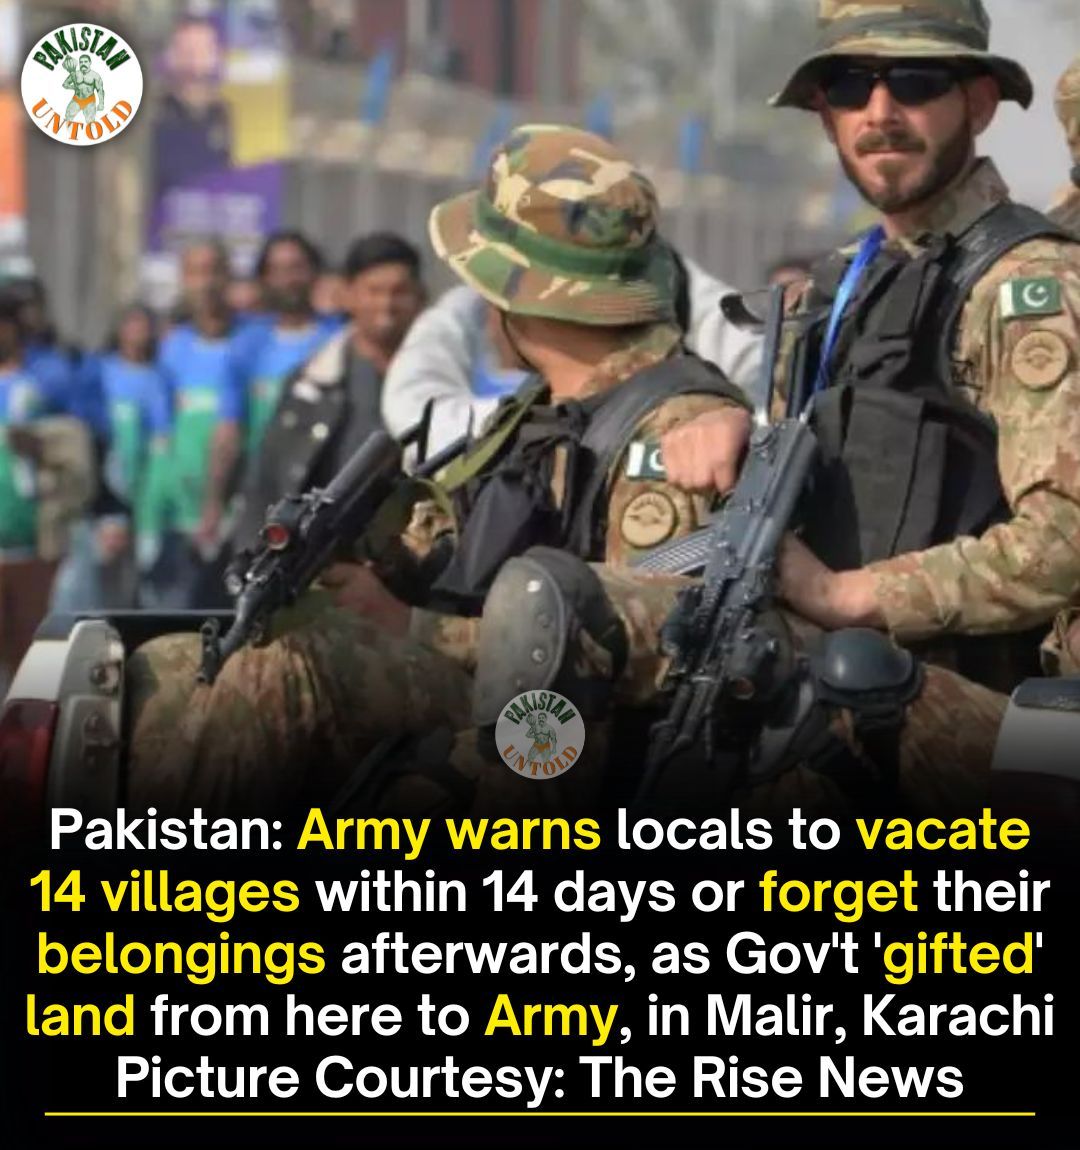 While armies elsewhere defend their nation's values, in Pakistan, it's more about exploiting citizens than protecting them.